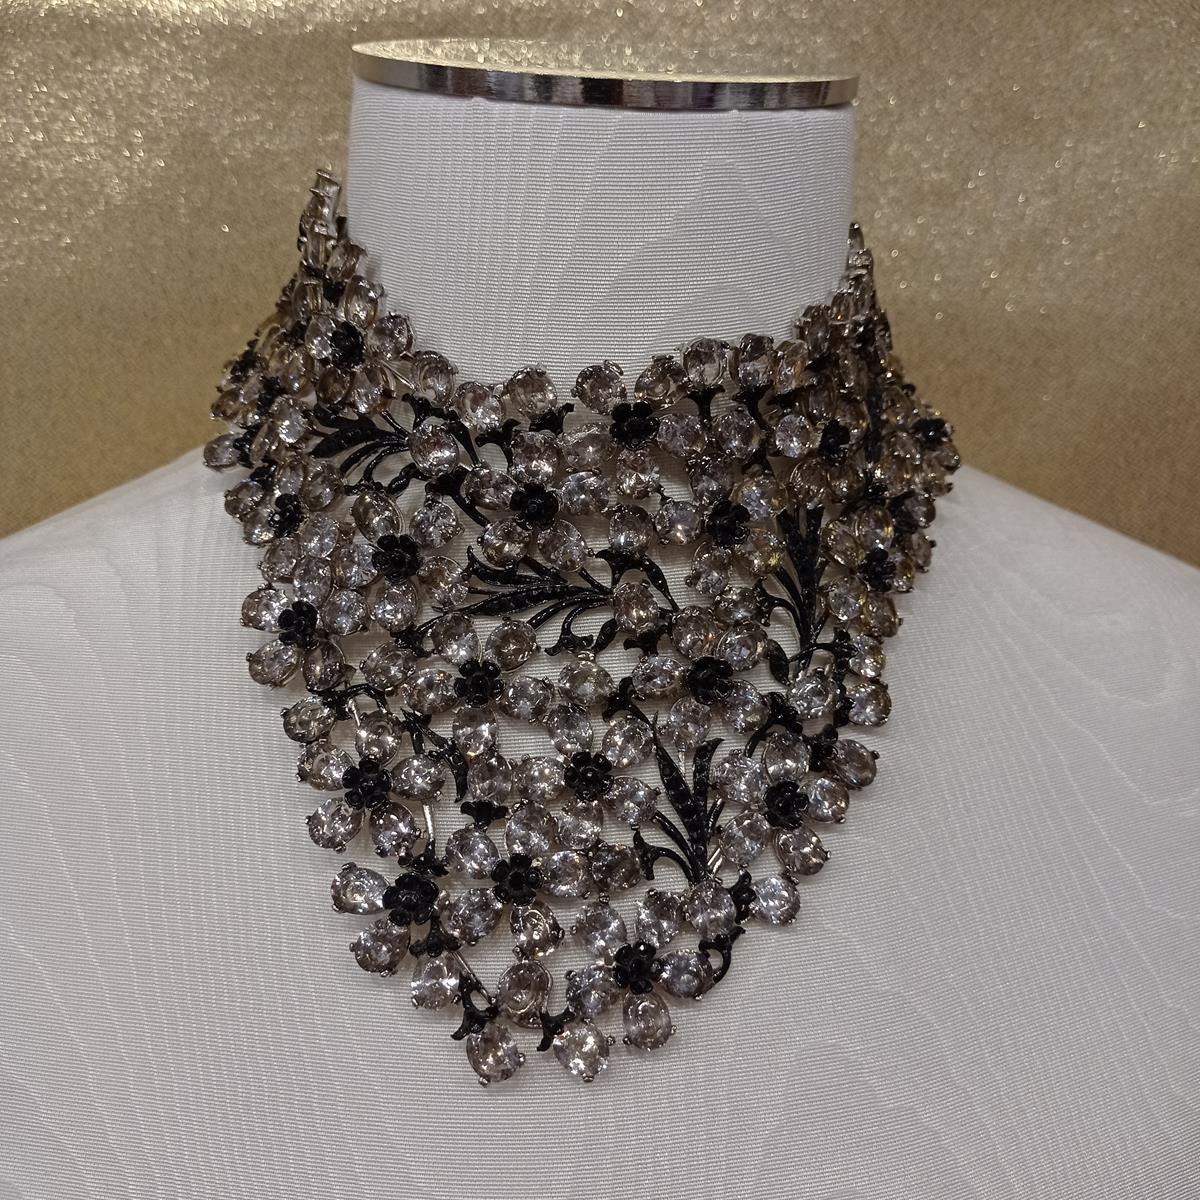 Fantastic masterpiece by Carlo Zini
One of the world greatest bijoux designers
Choker
Black and white crystals
Amazing floral ramage
Non allergenic rhodium
100% Artisanal work made in Milano
Worldwide express shipping included in the price !